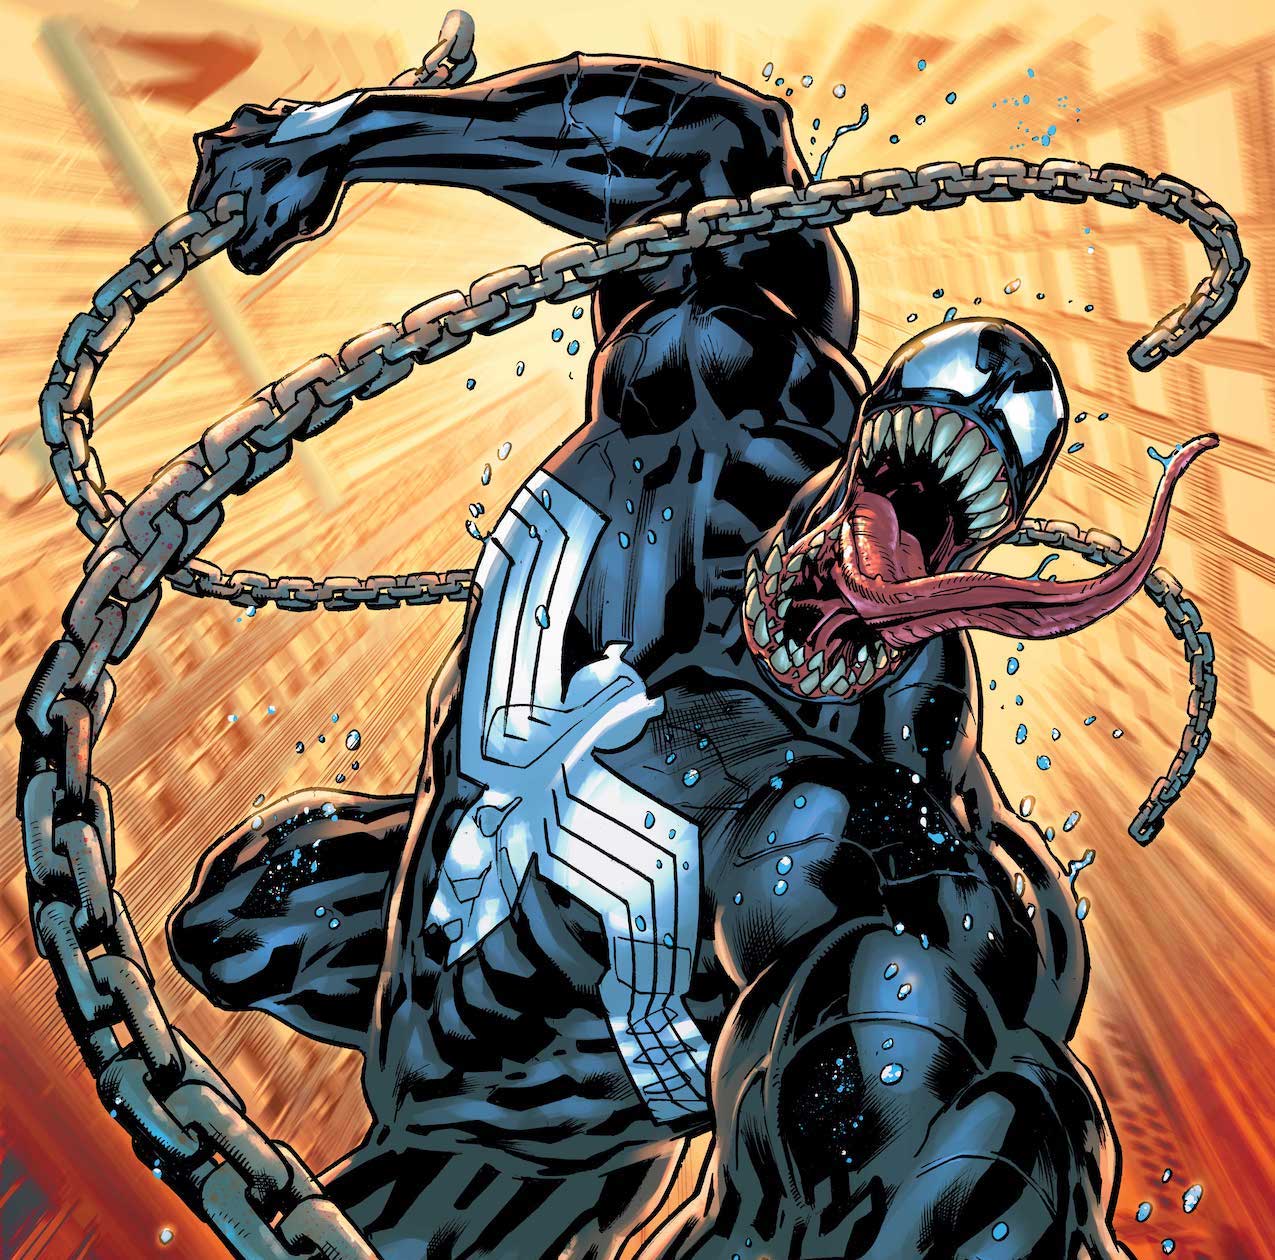 Marvel releases 'Venom' #1 cover for new series launch October 13